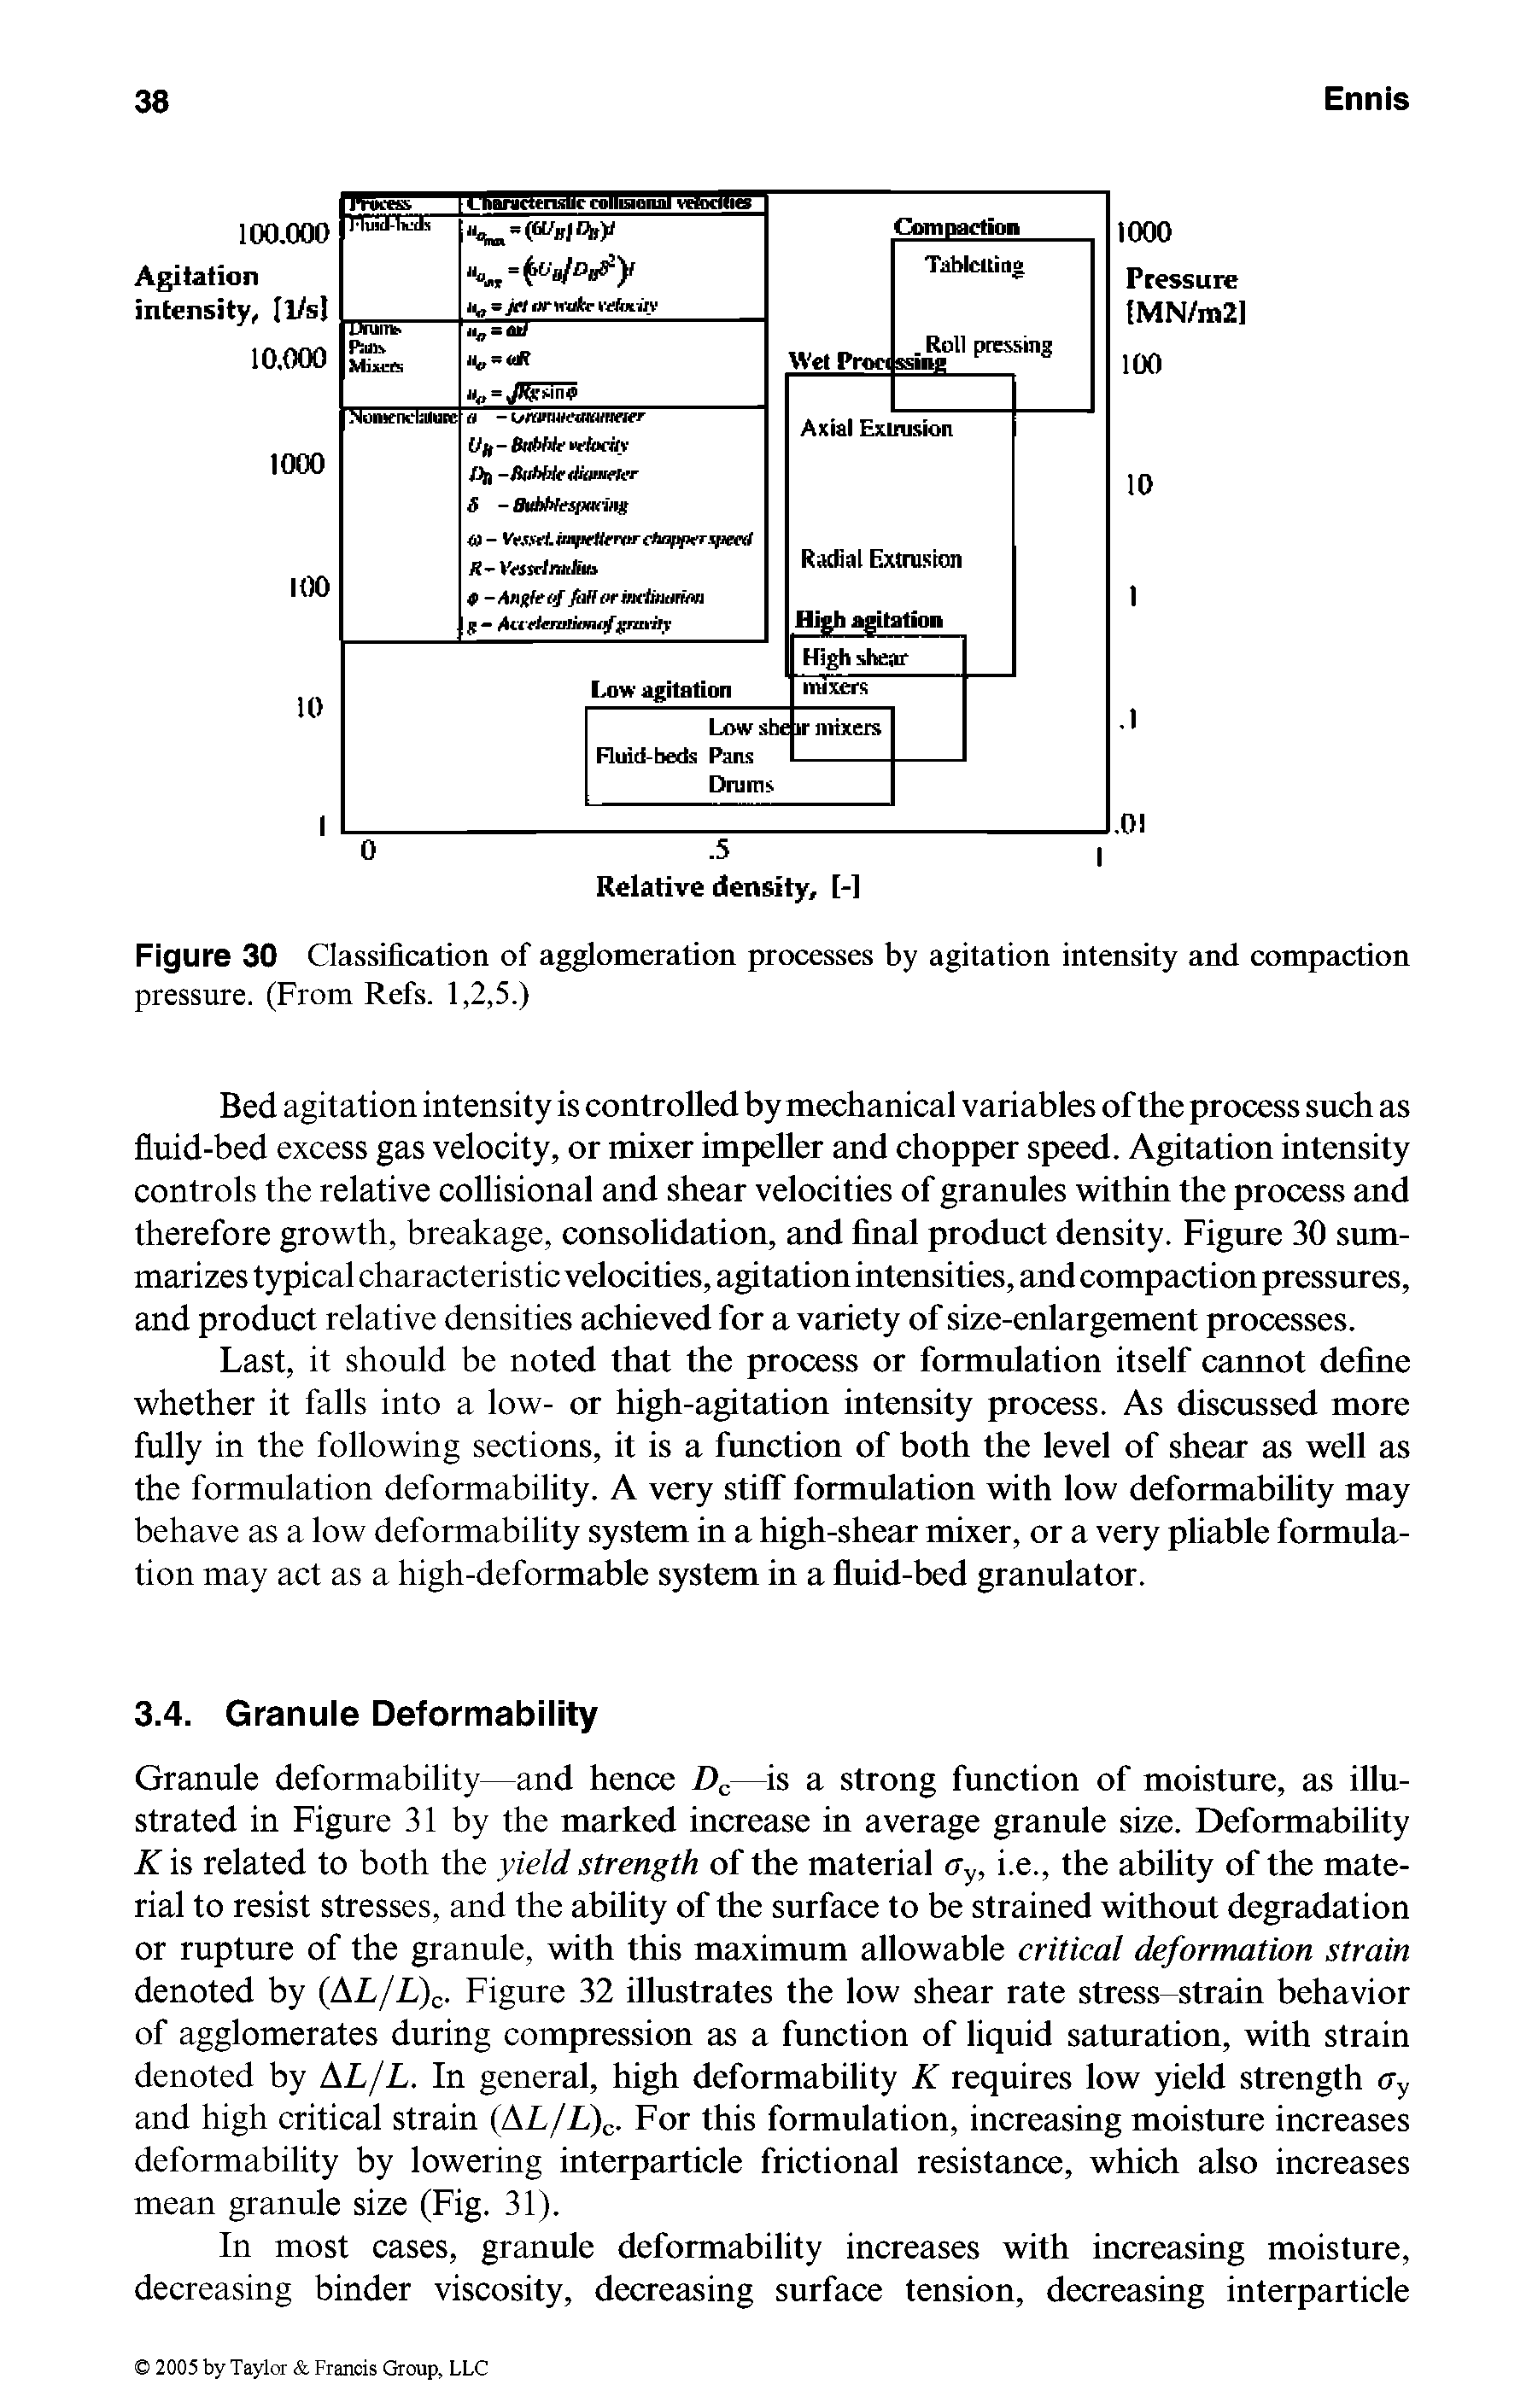 Figure 30 Classification of agglomeration processes by agitation intensity and compaction pressure. (From Refs. 1,2,5.)...